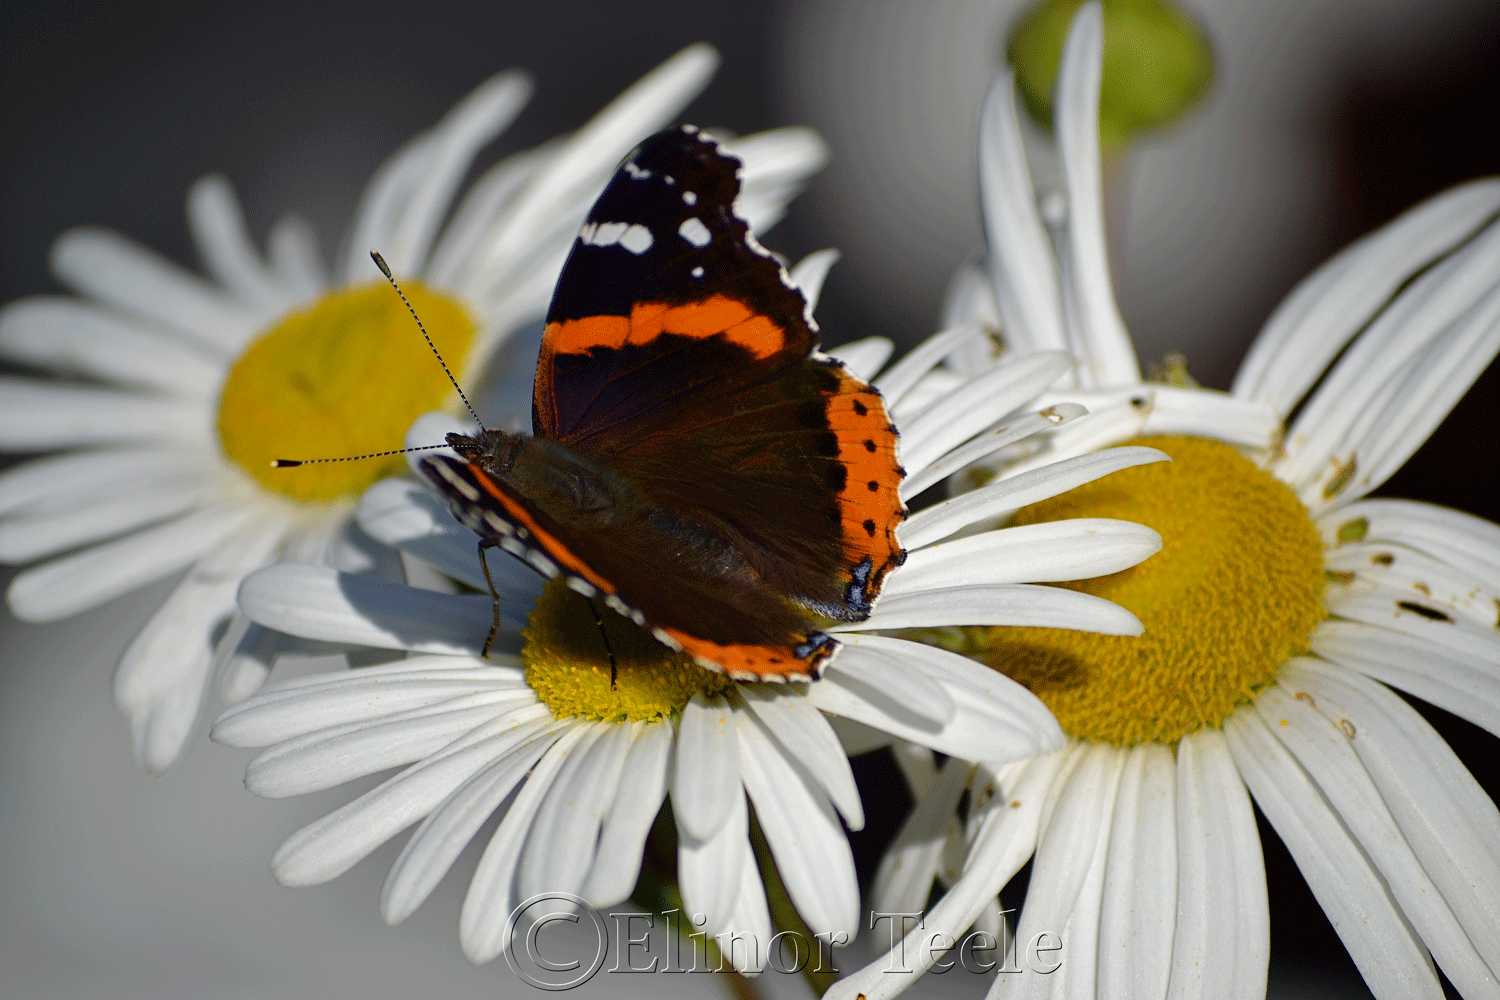 Red Admiral Butterfly in October